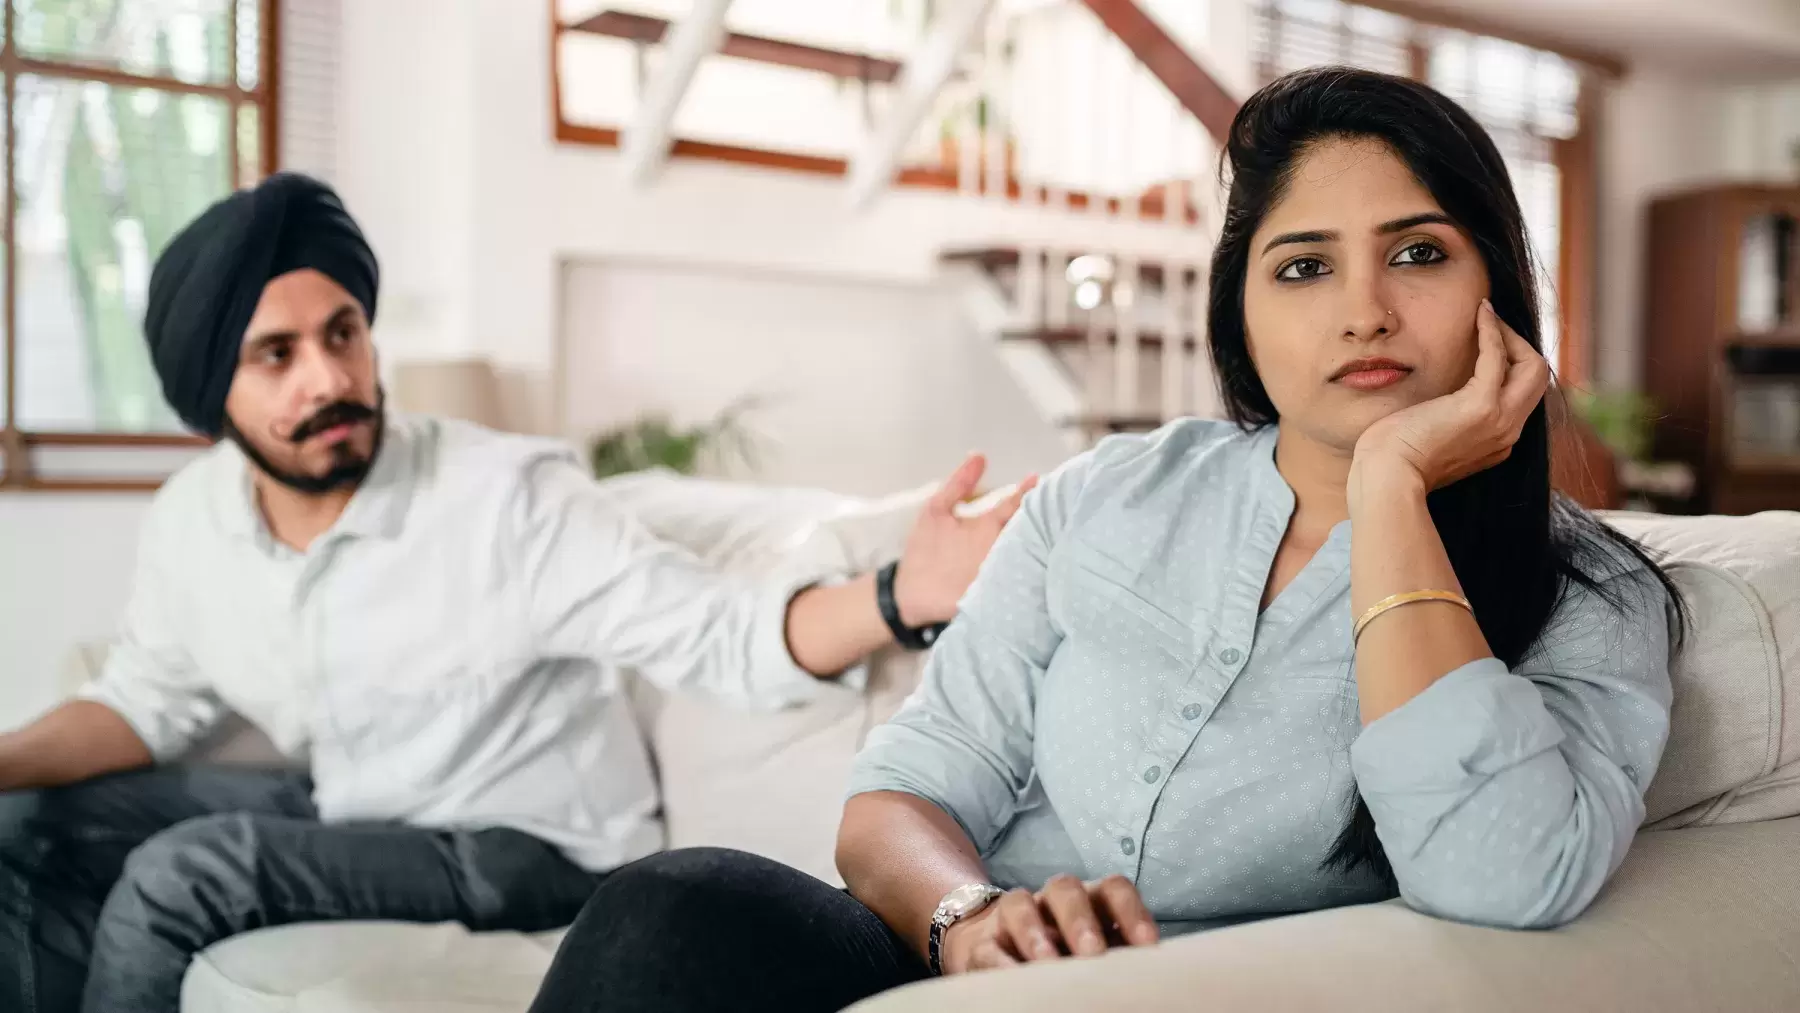 Couple sitting on couch looking upset